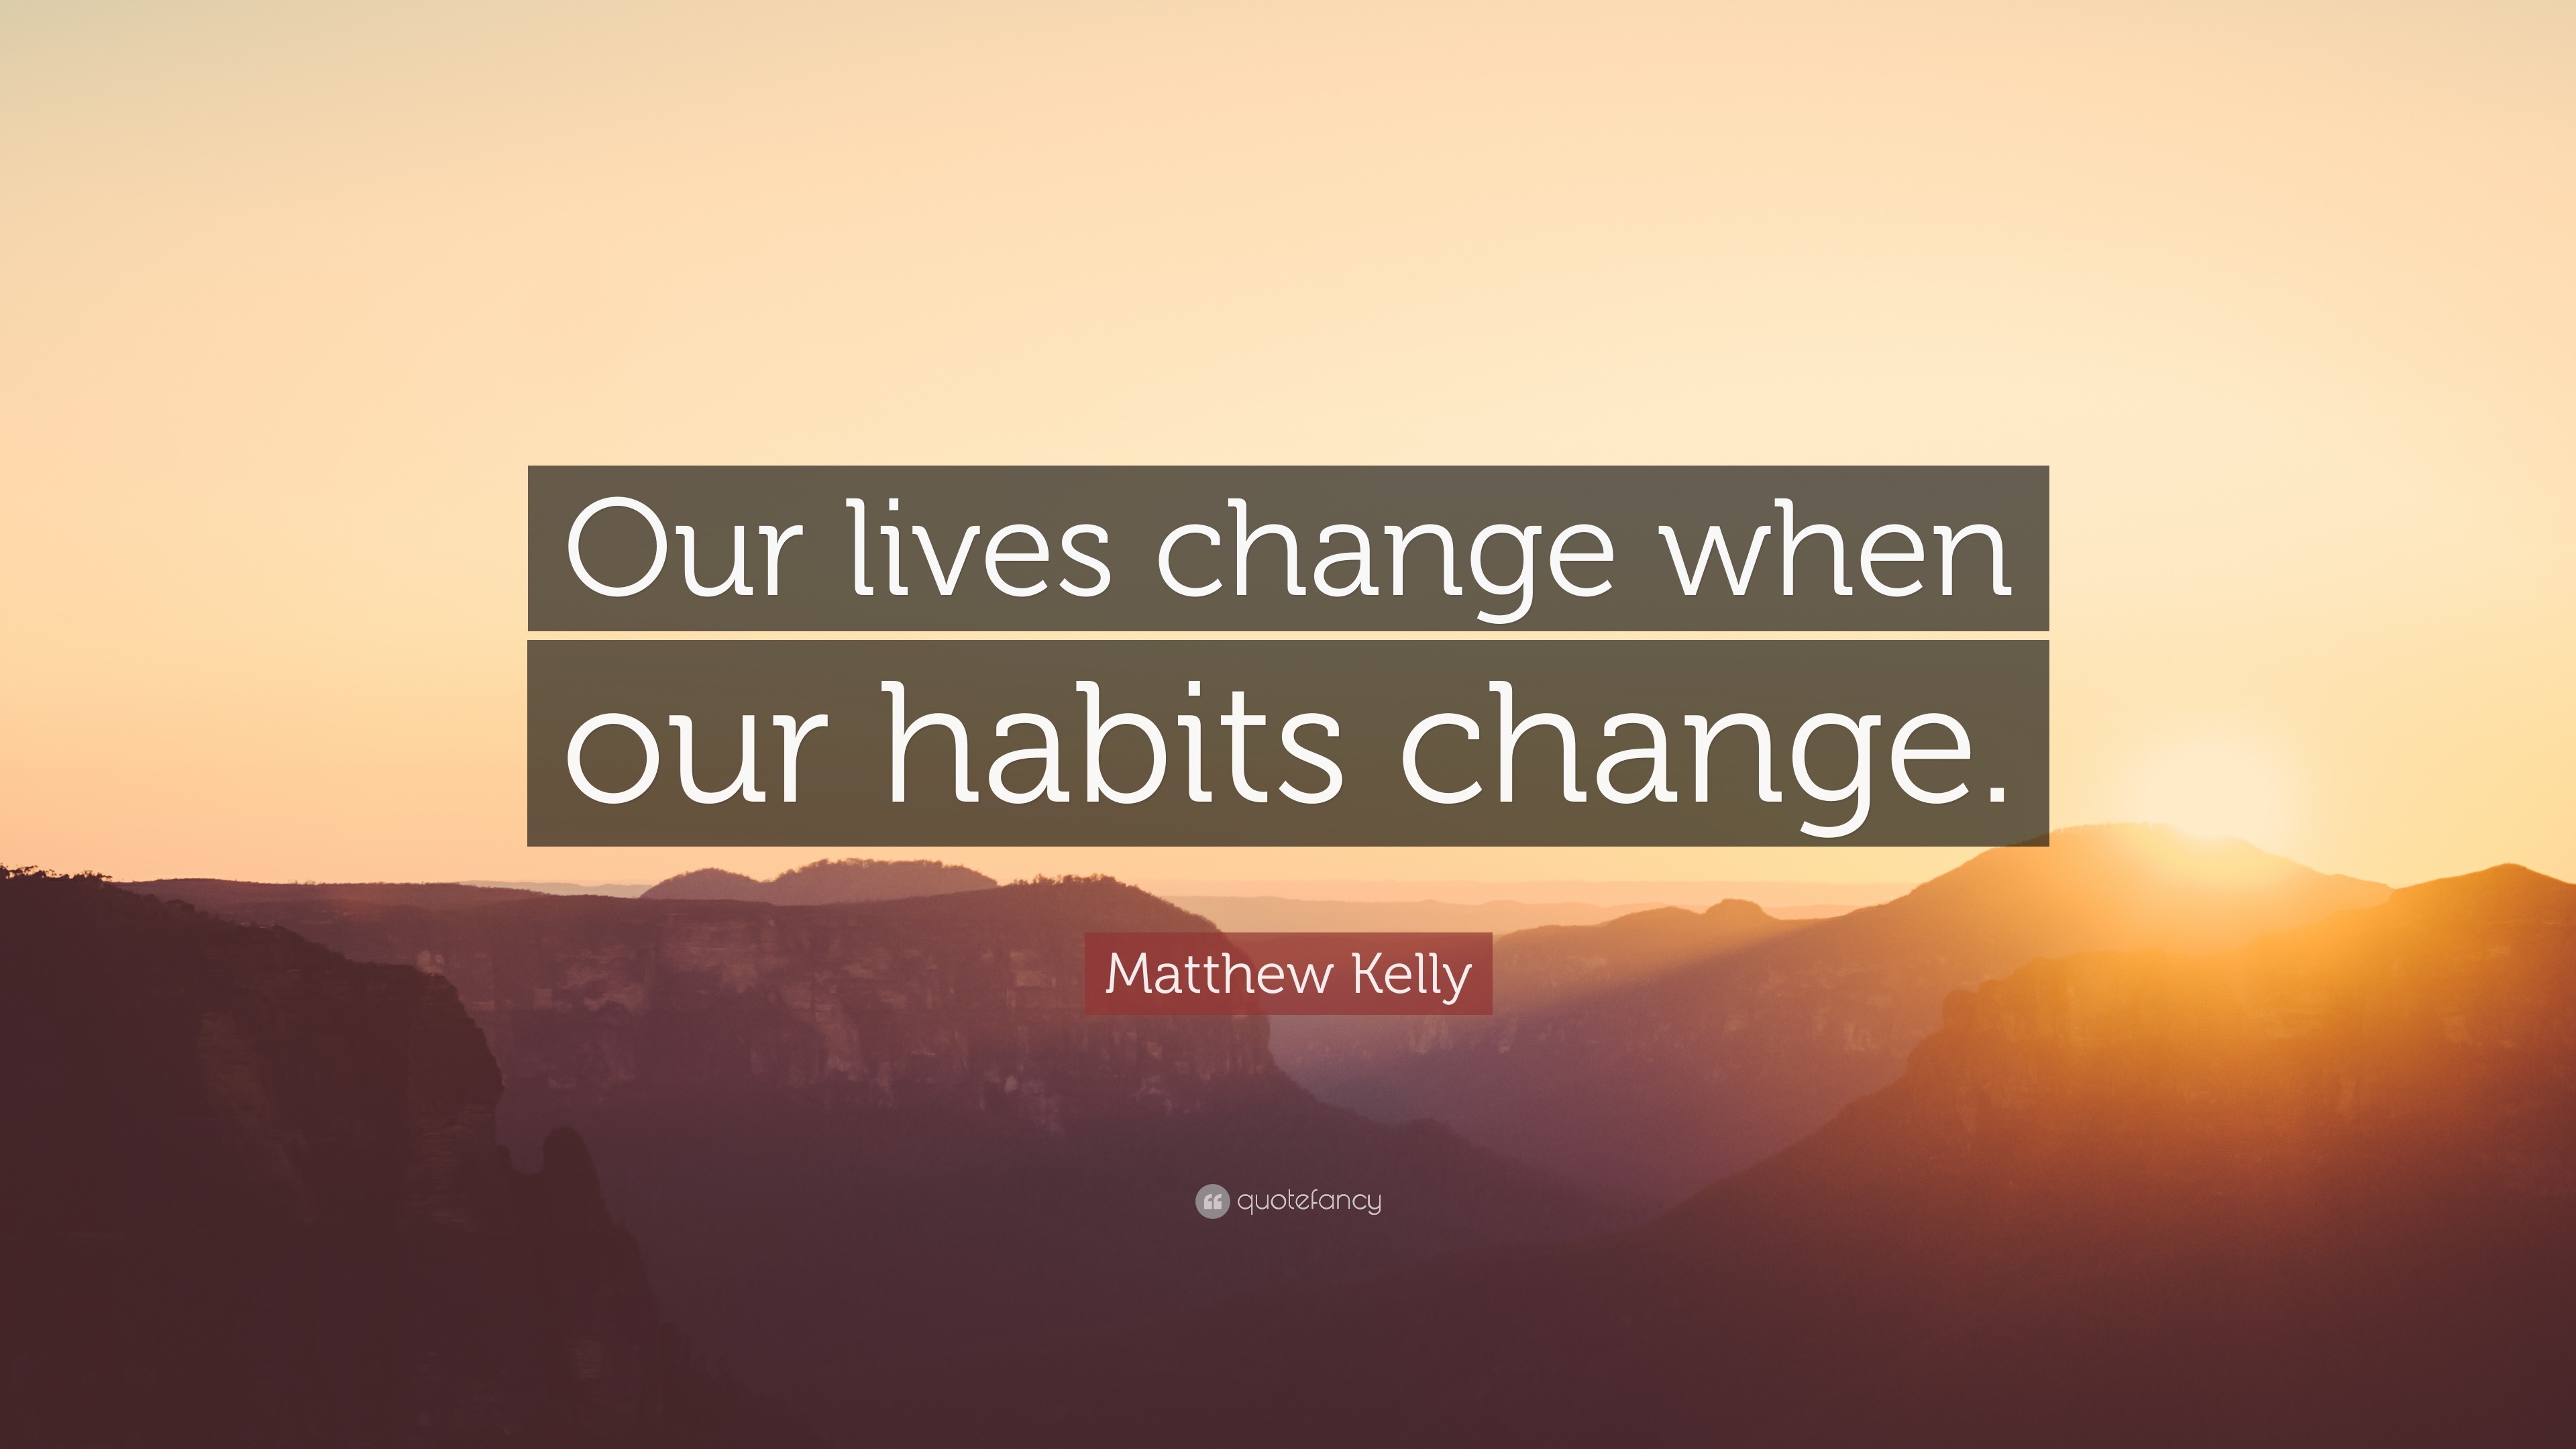 Matthew Kelly Quote: “Our lives change when our habits change.”